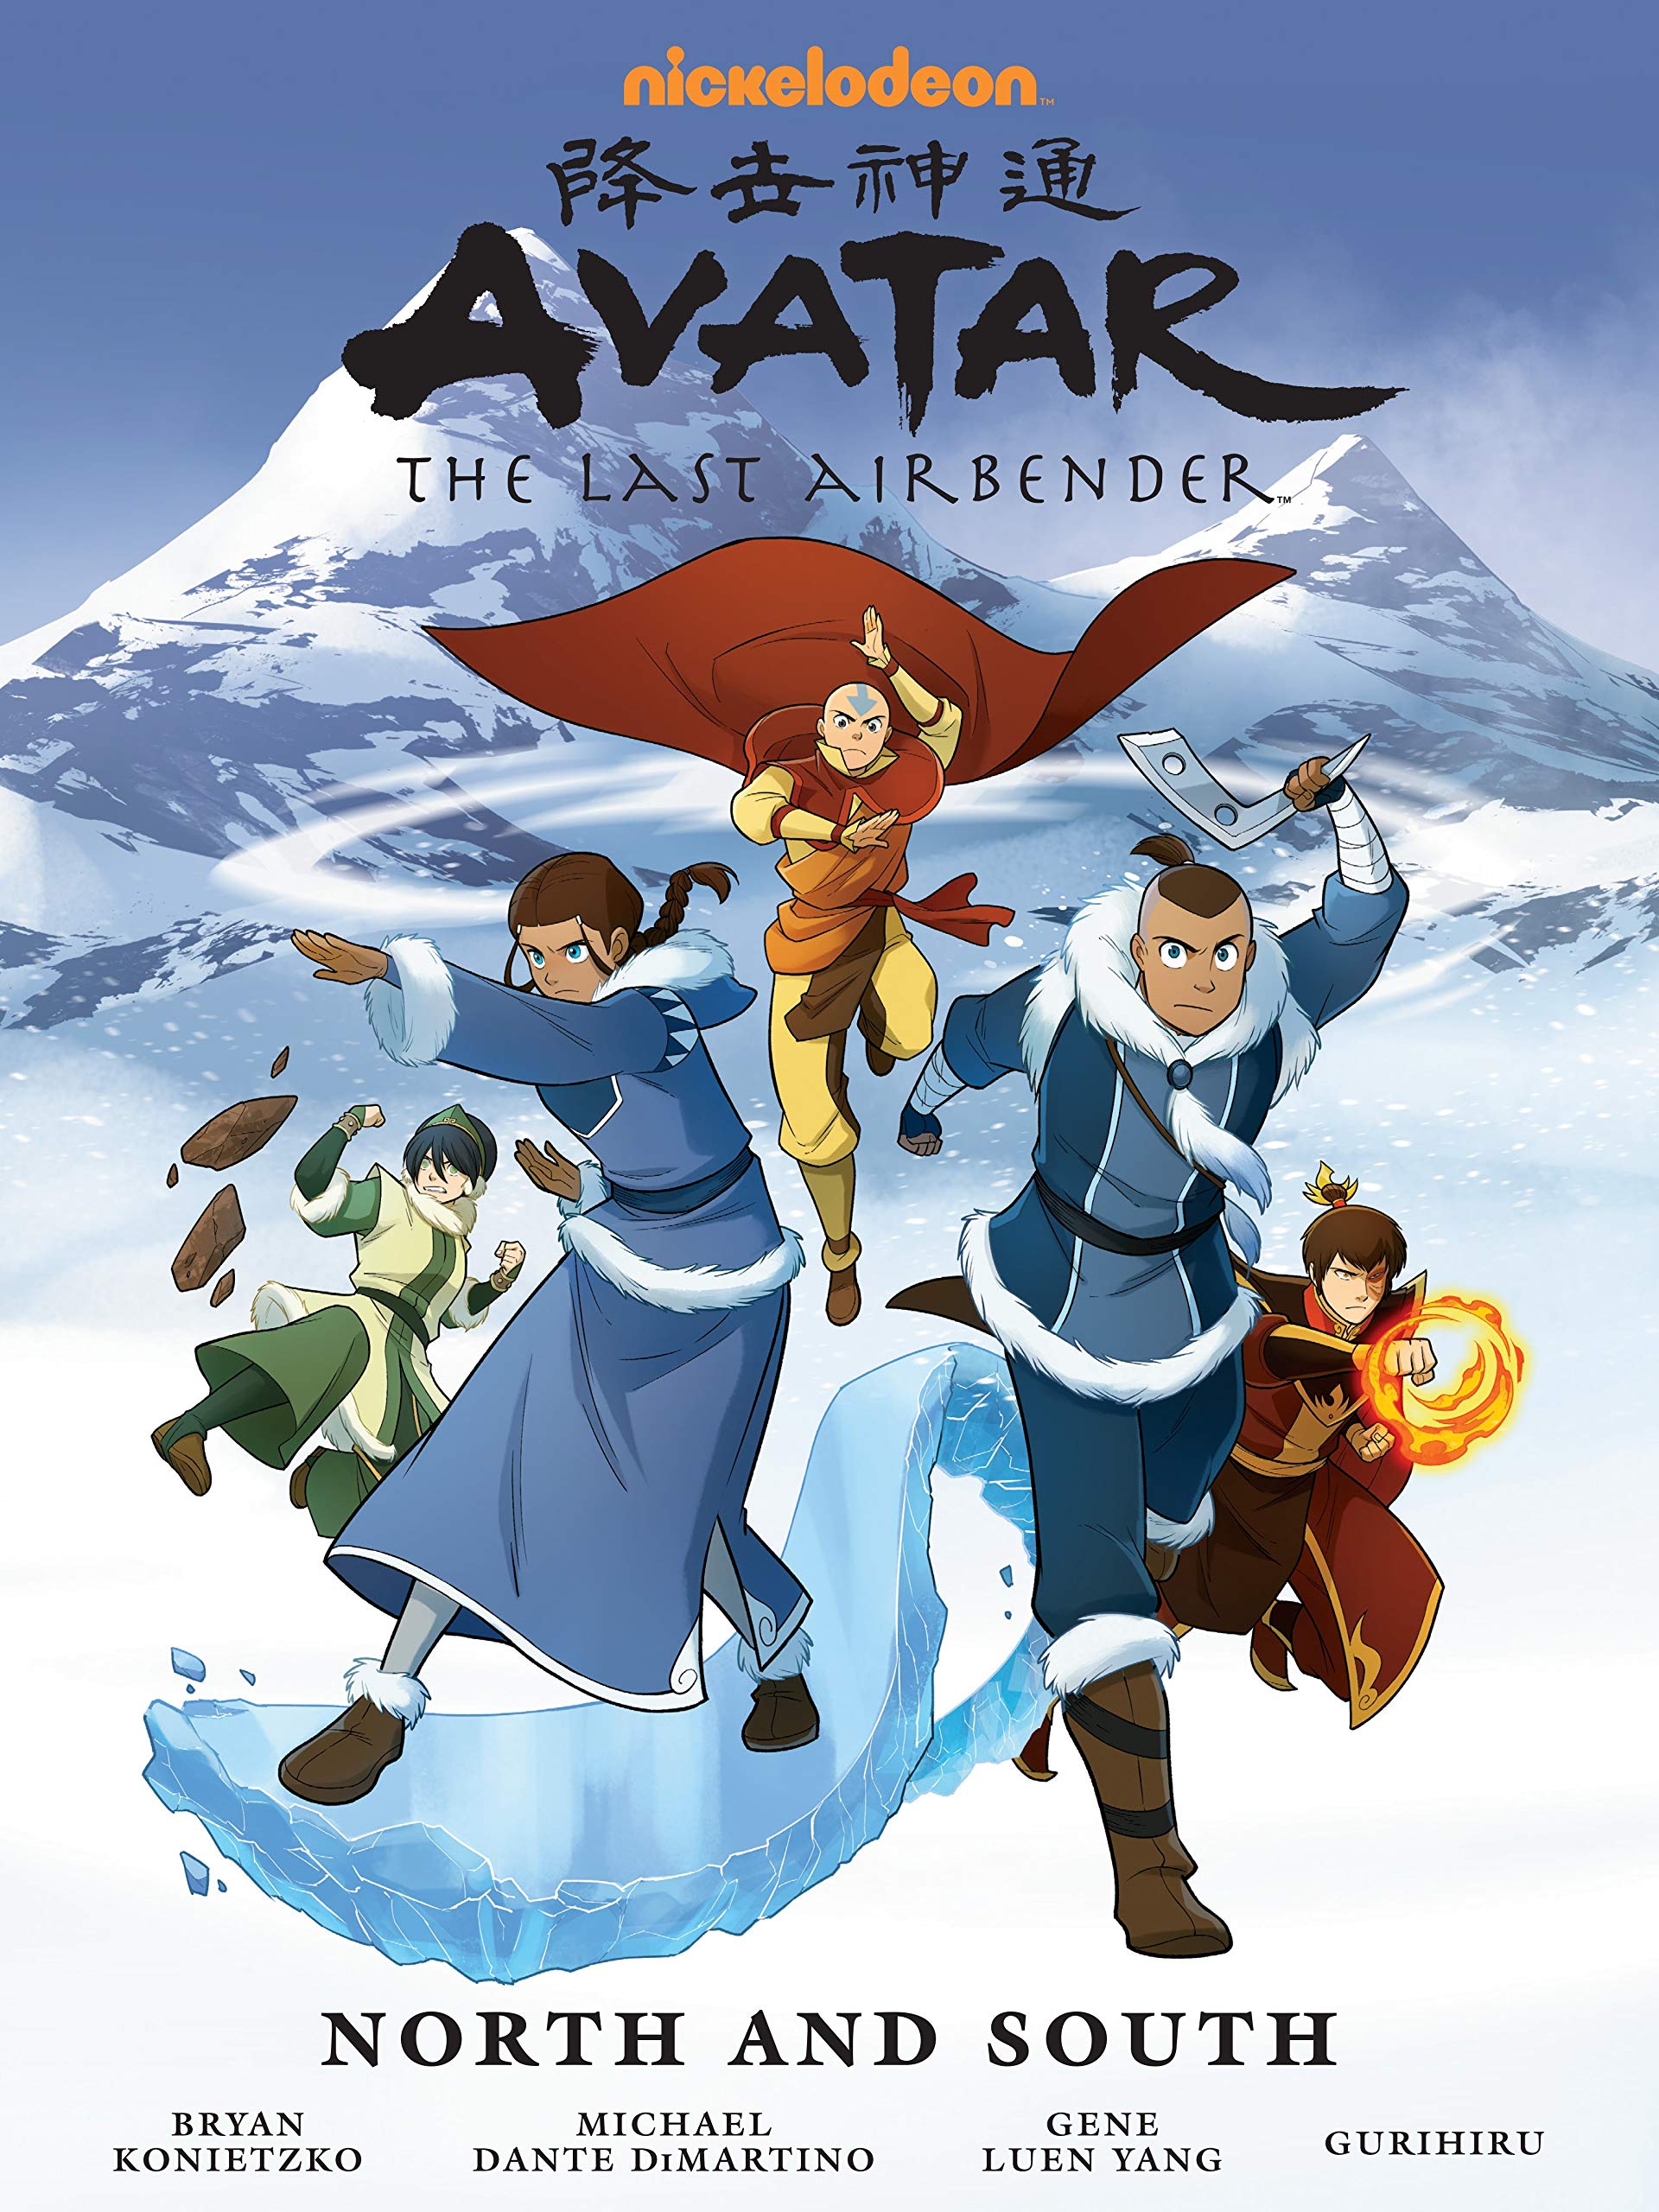 Cover of Avatar the Last Airbender graphic novel.